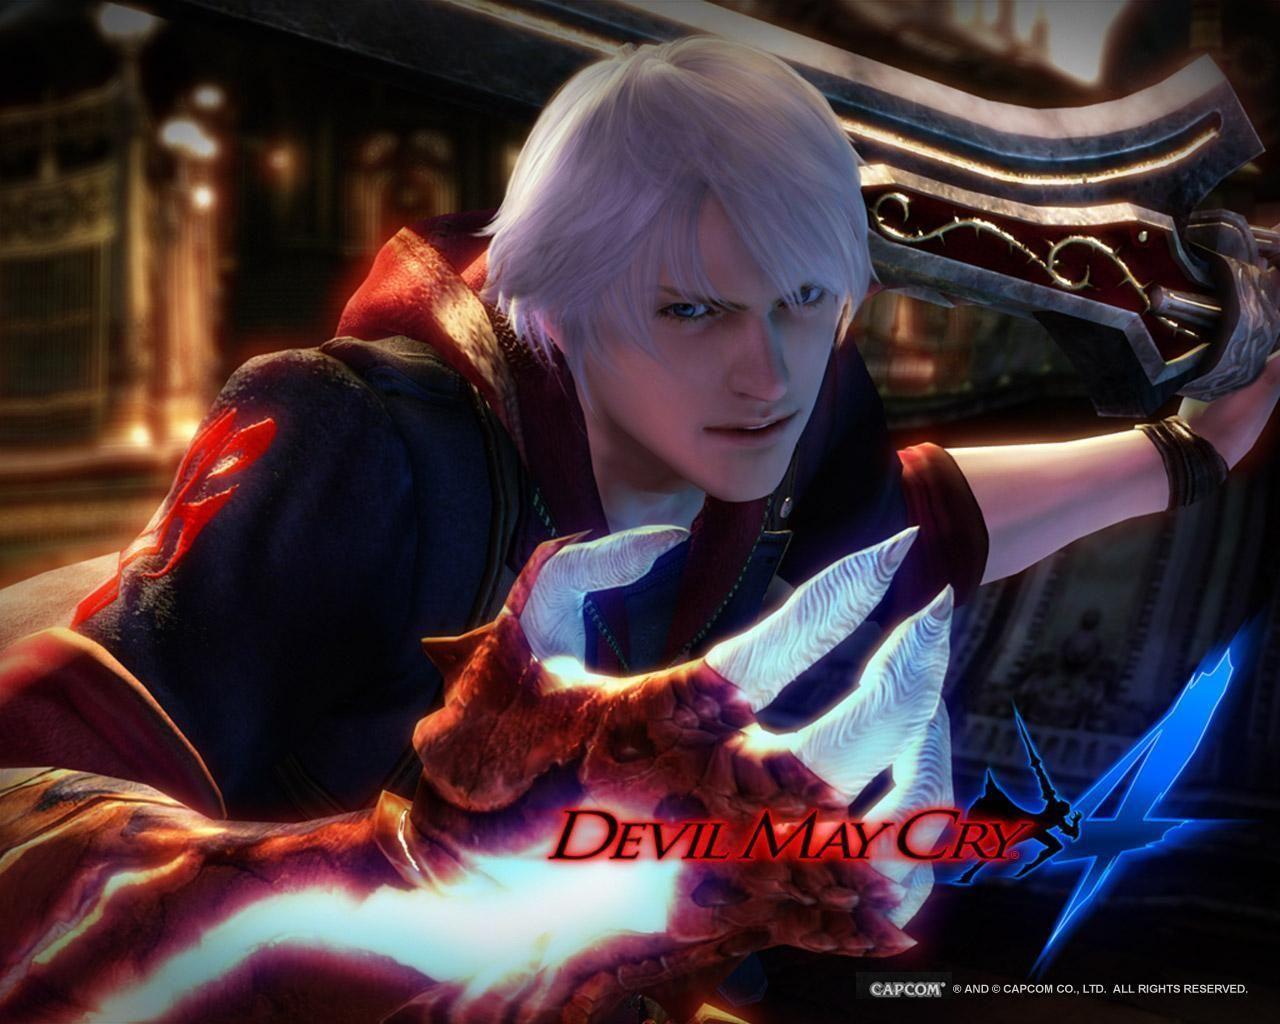 Latest Screens, Devil May Cry 4 Wallpaper